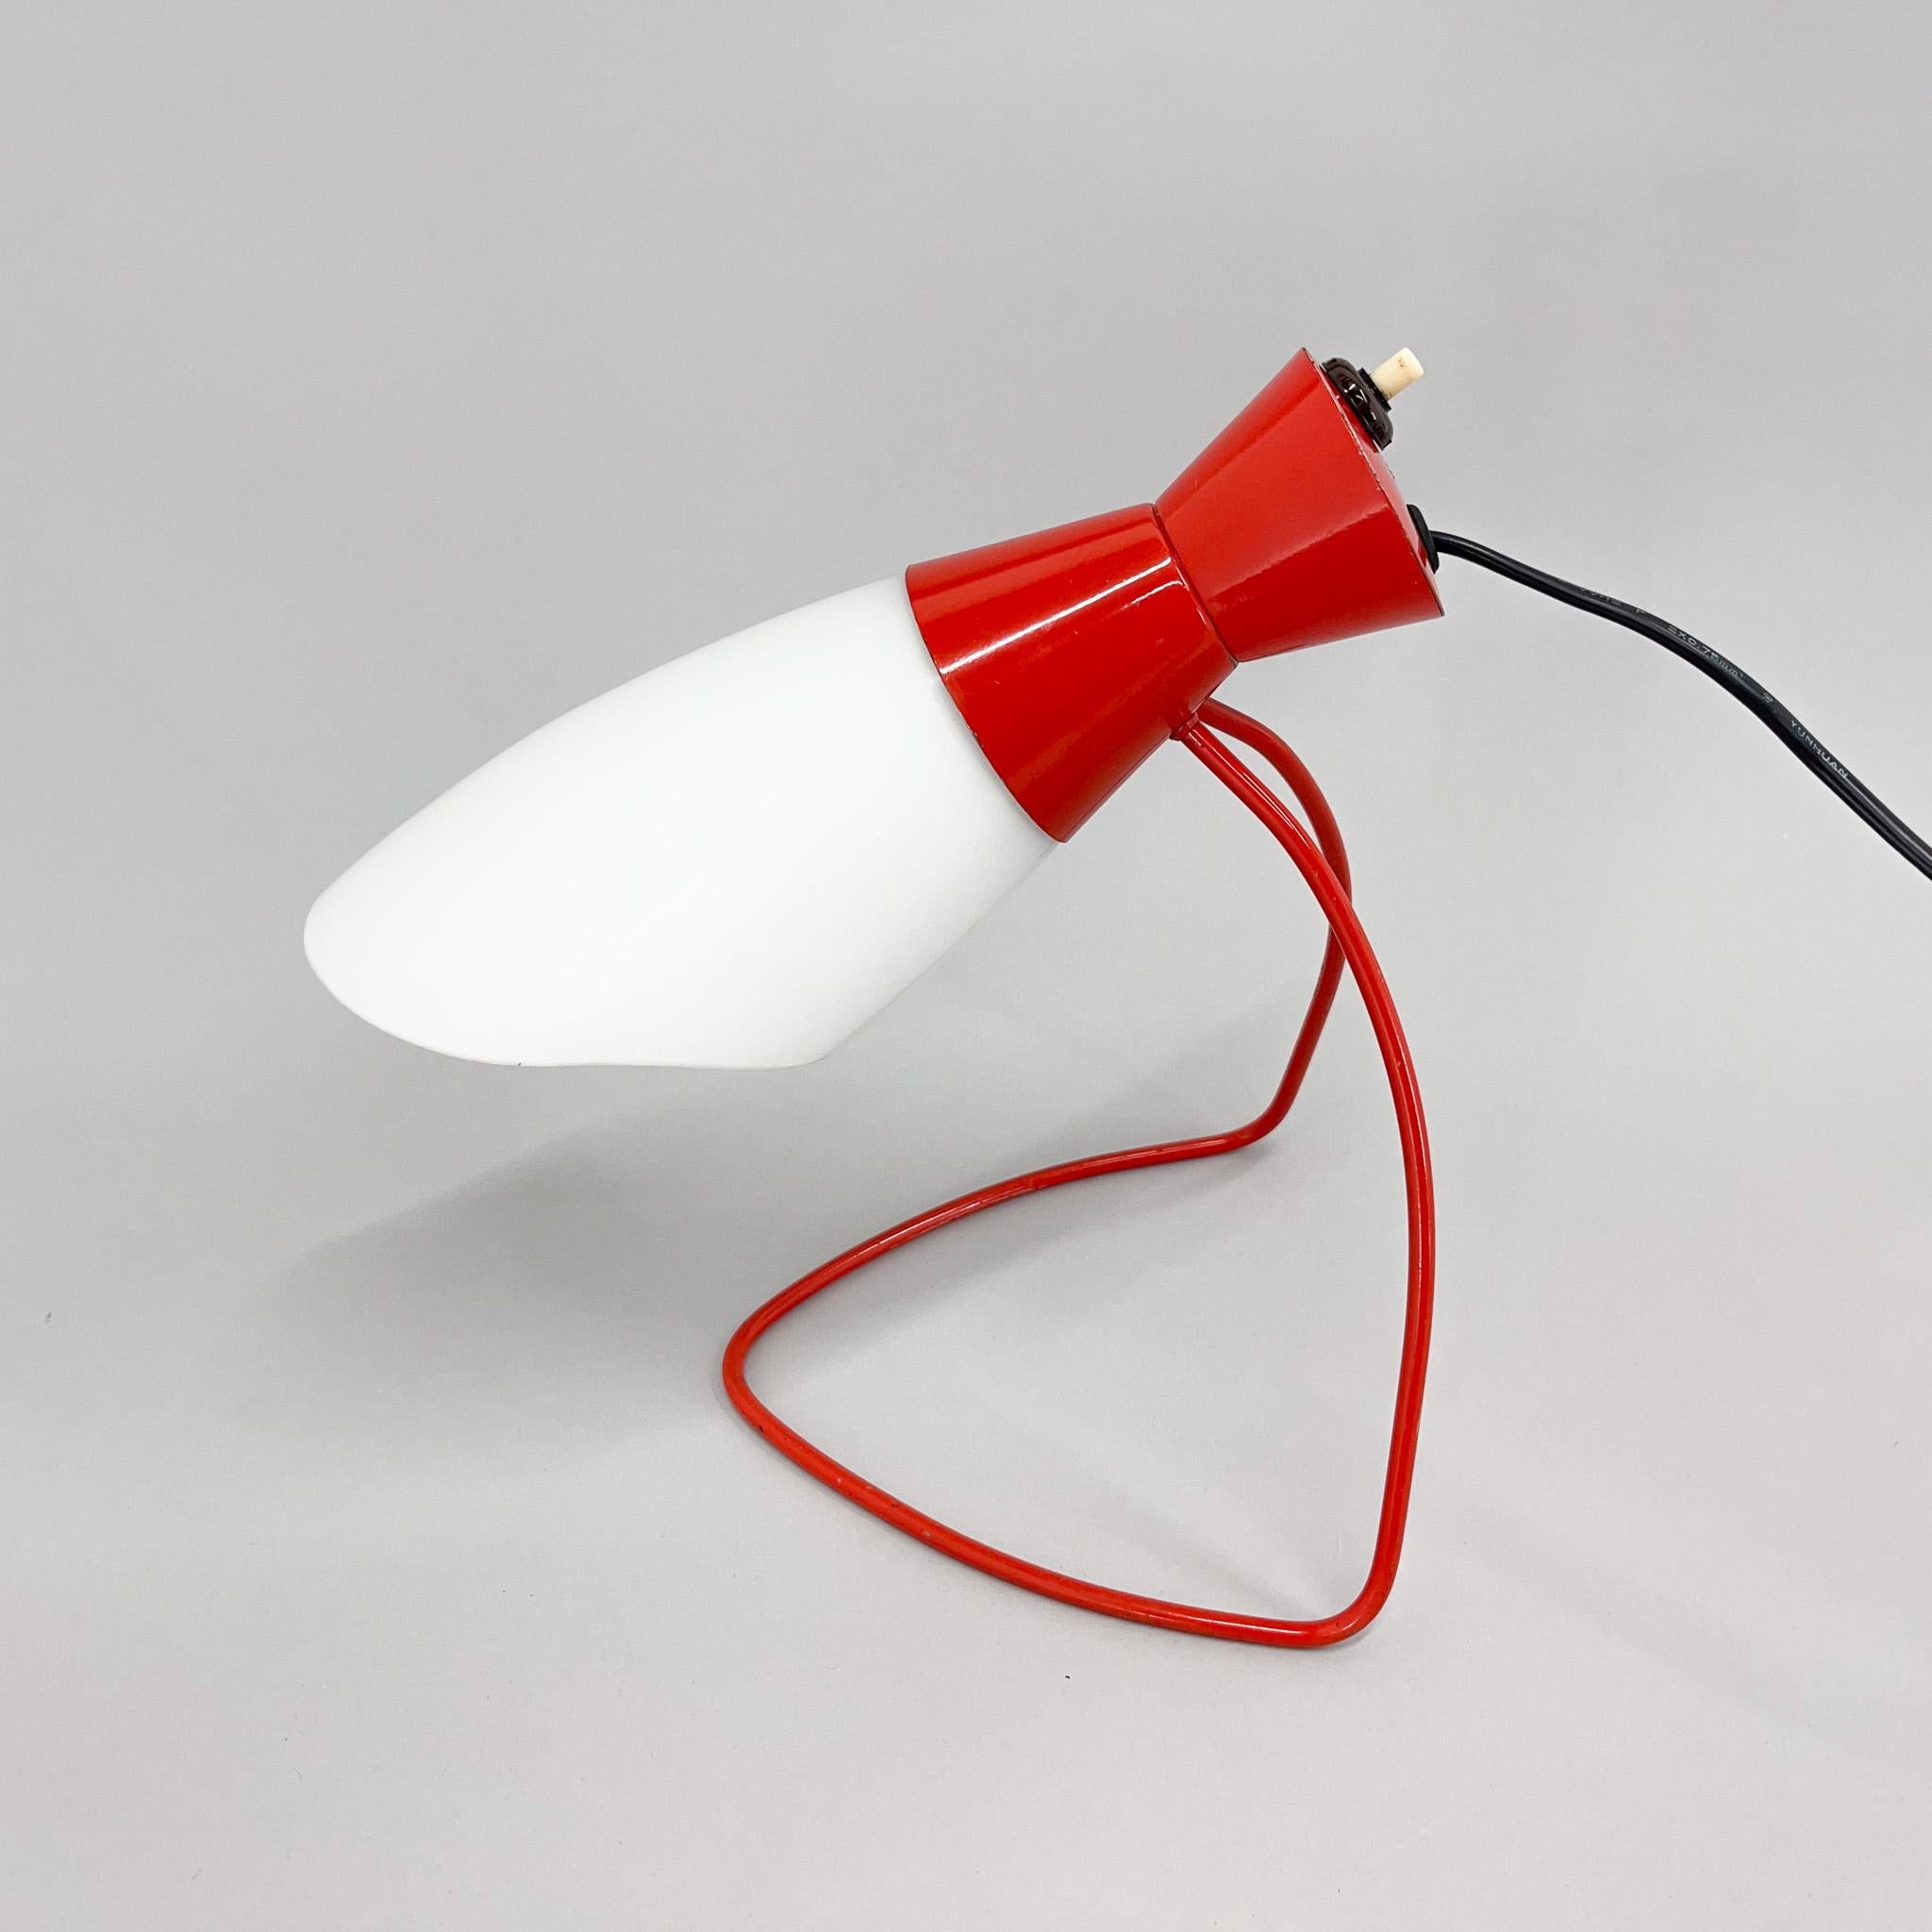 Designer lighting from the 1950's. It was produced in former Czechoslovakia by Napako and designed by famous Josef Hůrka. Bulb: 1 x E25-E27.